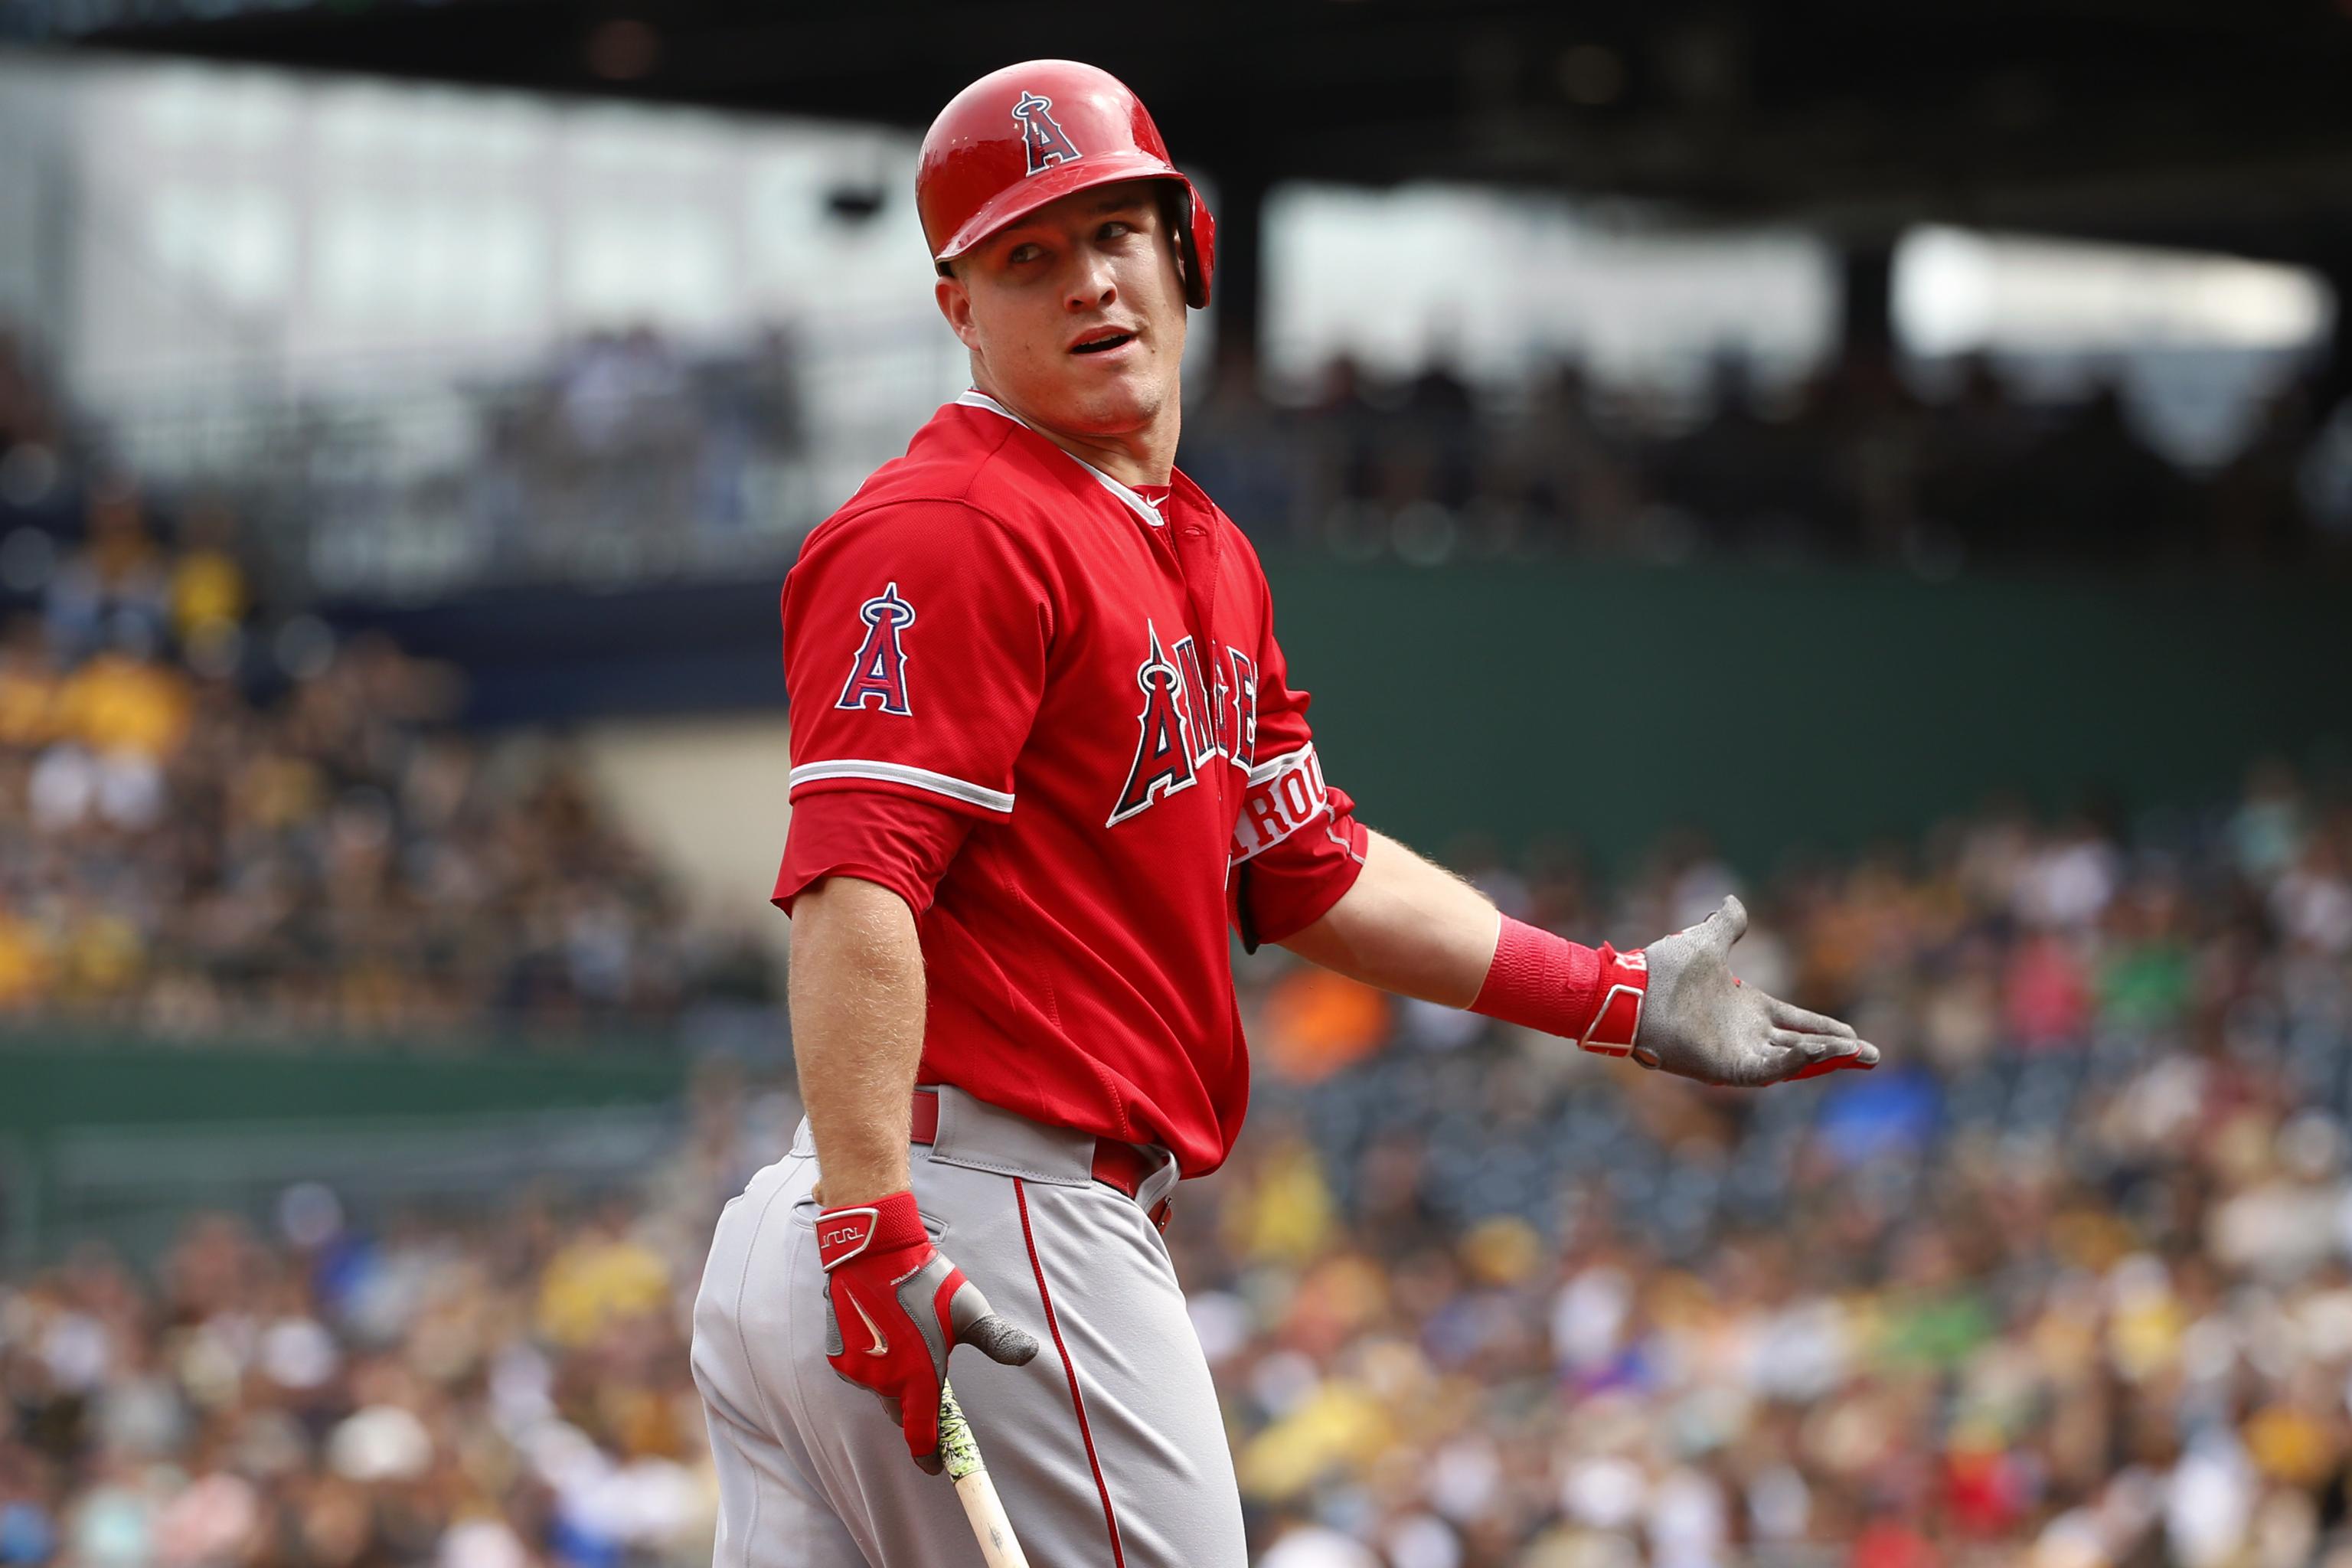 Could the Giants trade for Mike Trout? (No.) - McCovey Chronicles